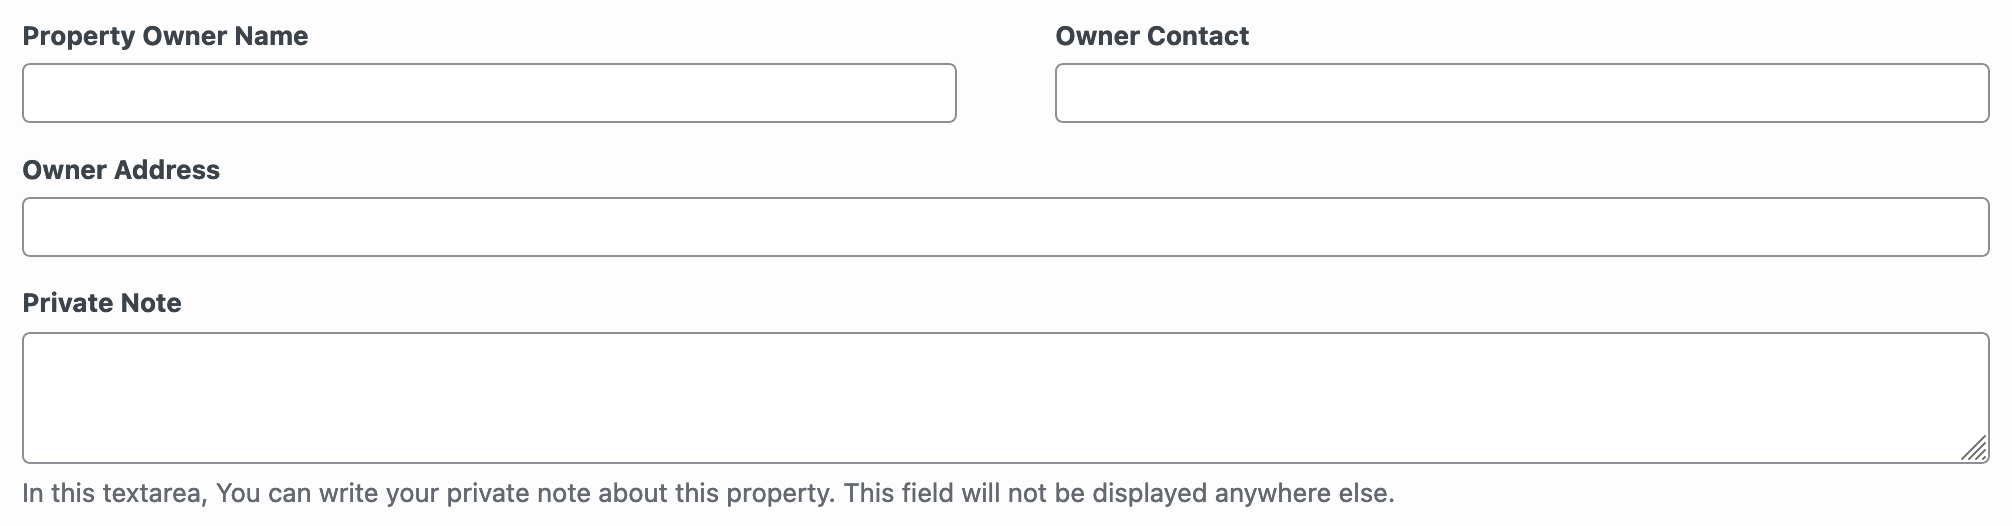 Property Label Text & Background Color